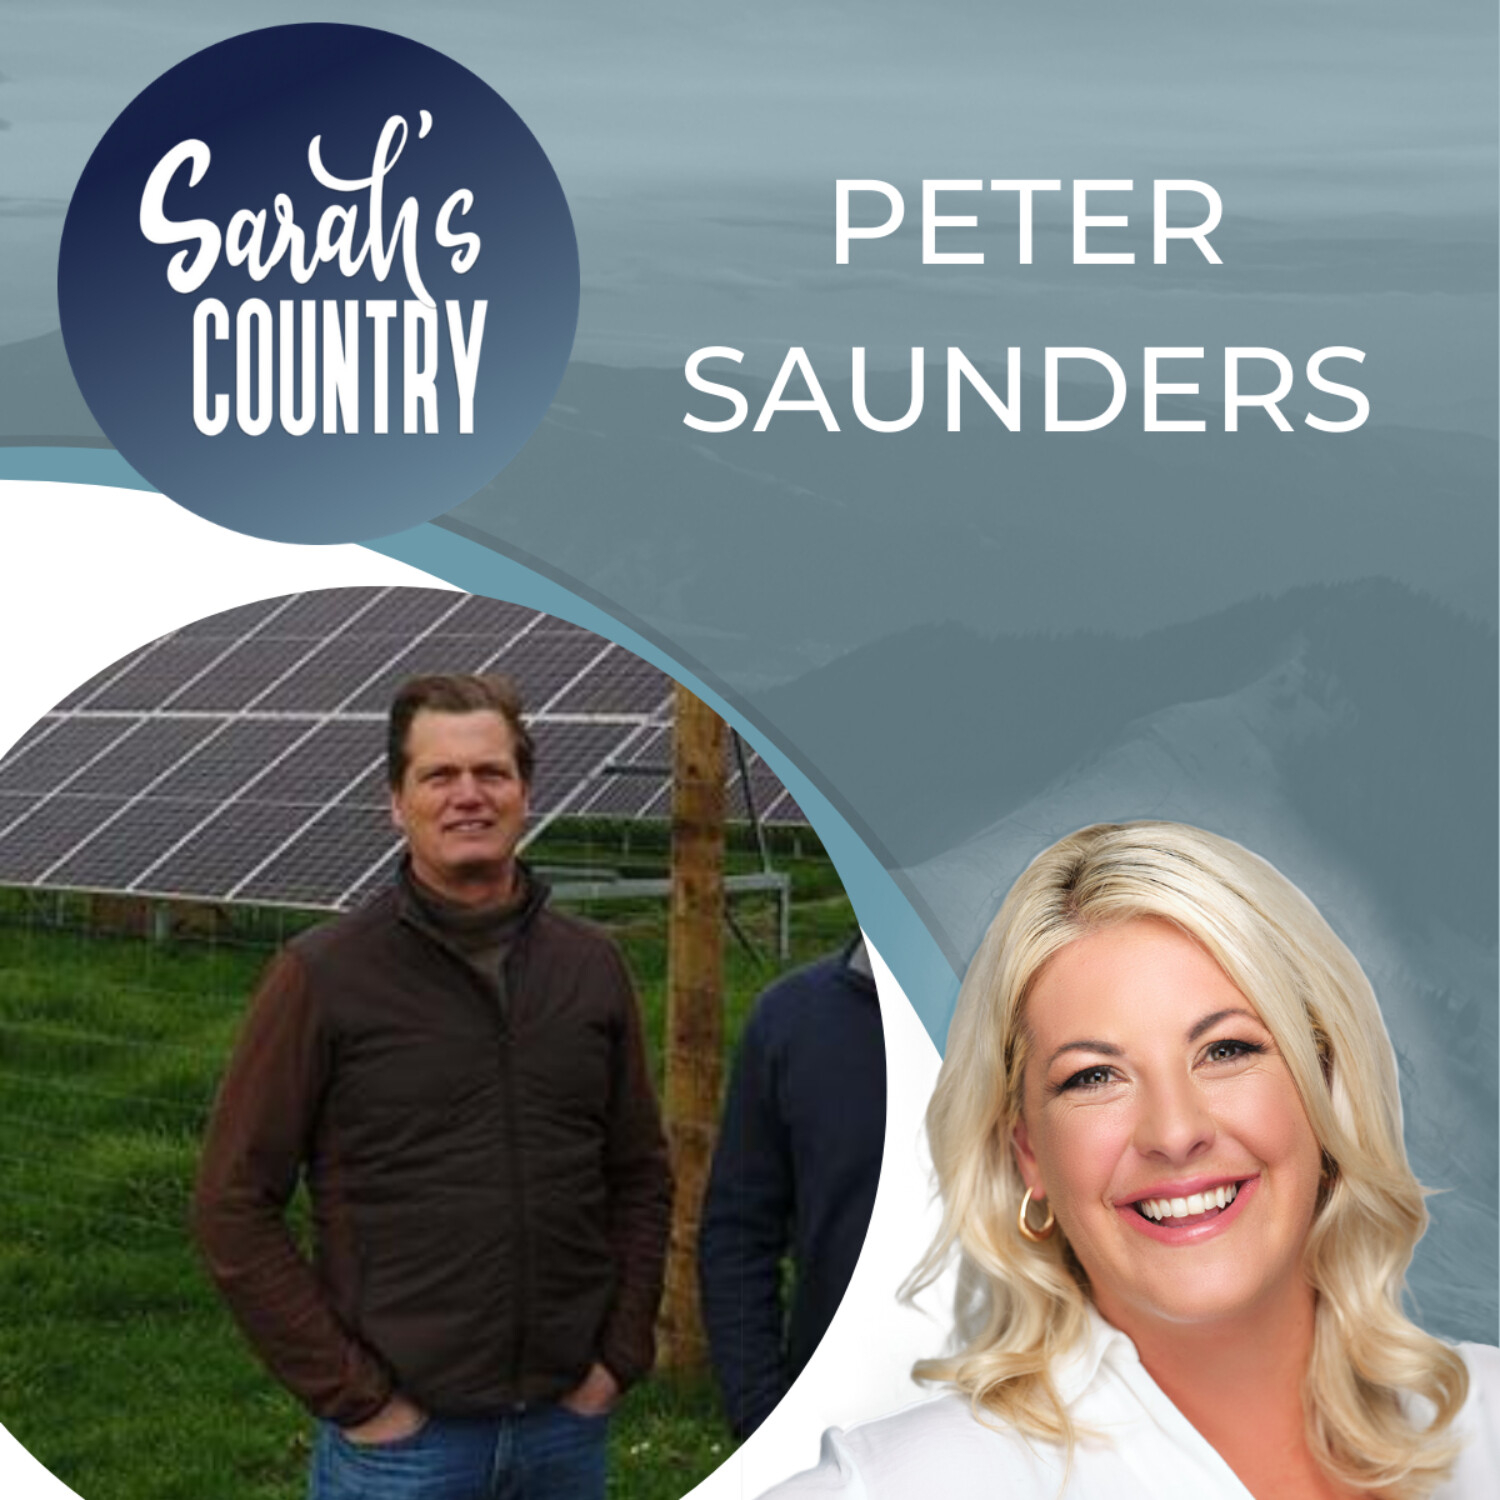 “New tech to cut rural energy costs” with Peter Saunders